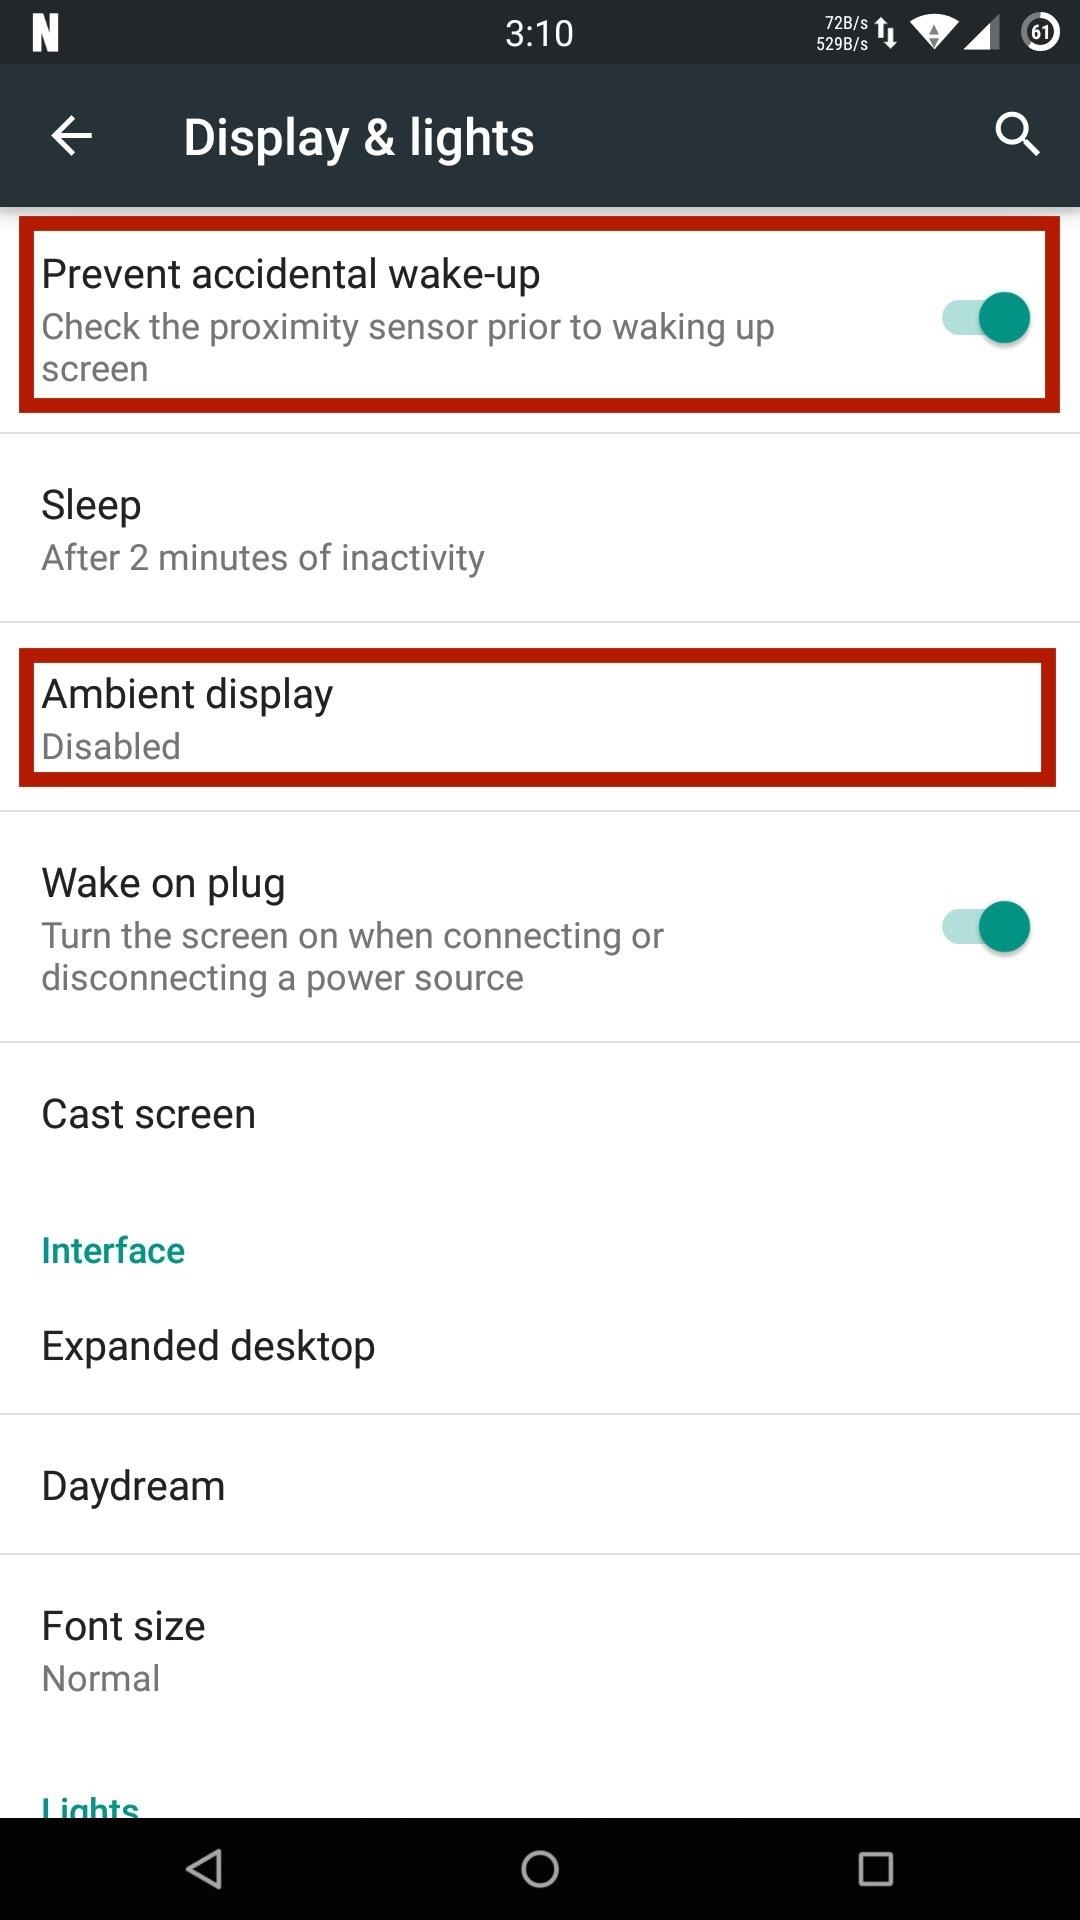 Fix Touchscreen Issues on Your OnePlus One with These Quick & Easy Tips